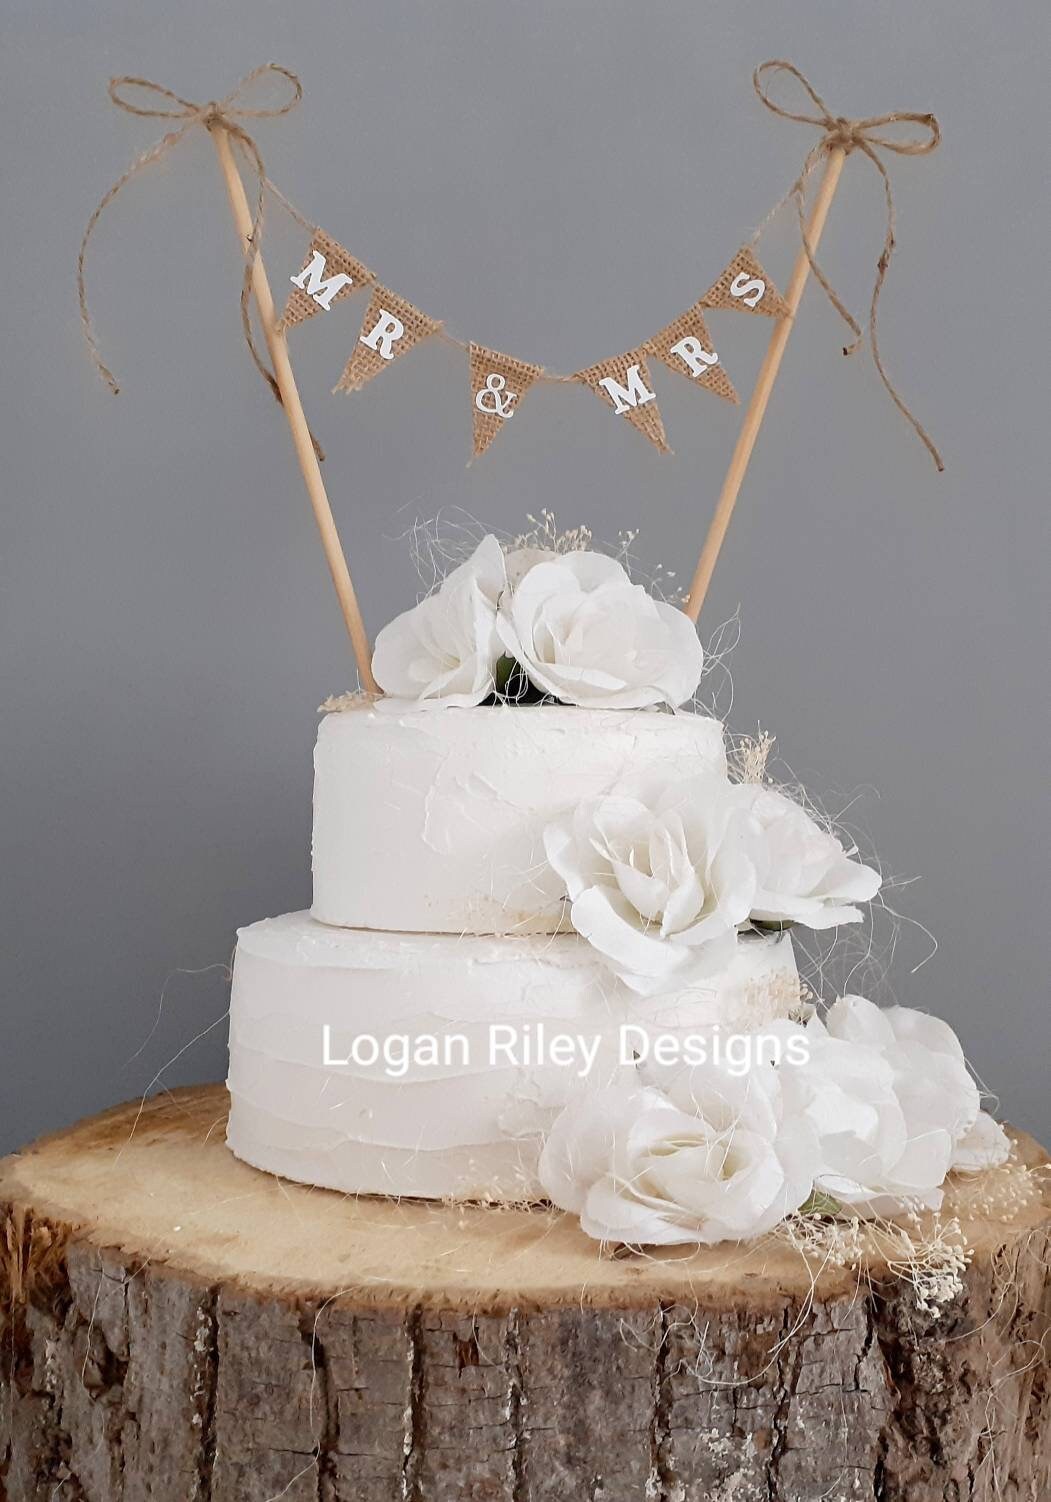 PERSONALISED Cake Topper Bunting TWINE OR RIBBON BOWS Hessian MR & MRS Surname 